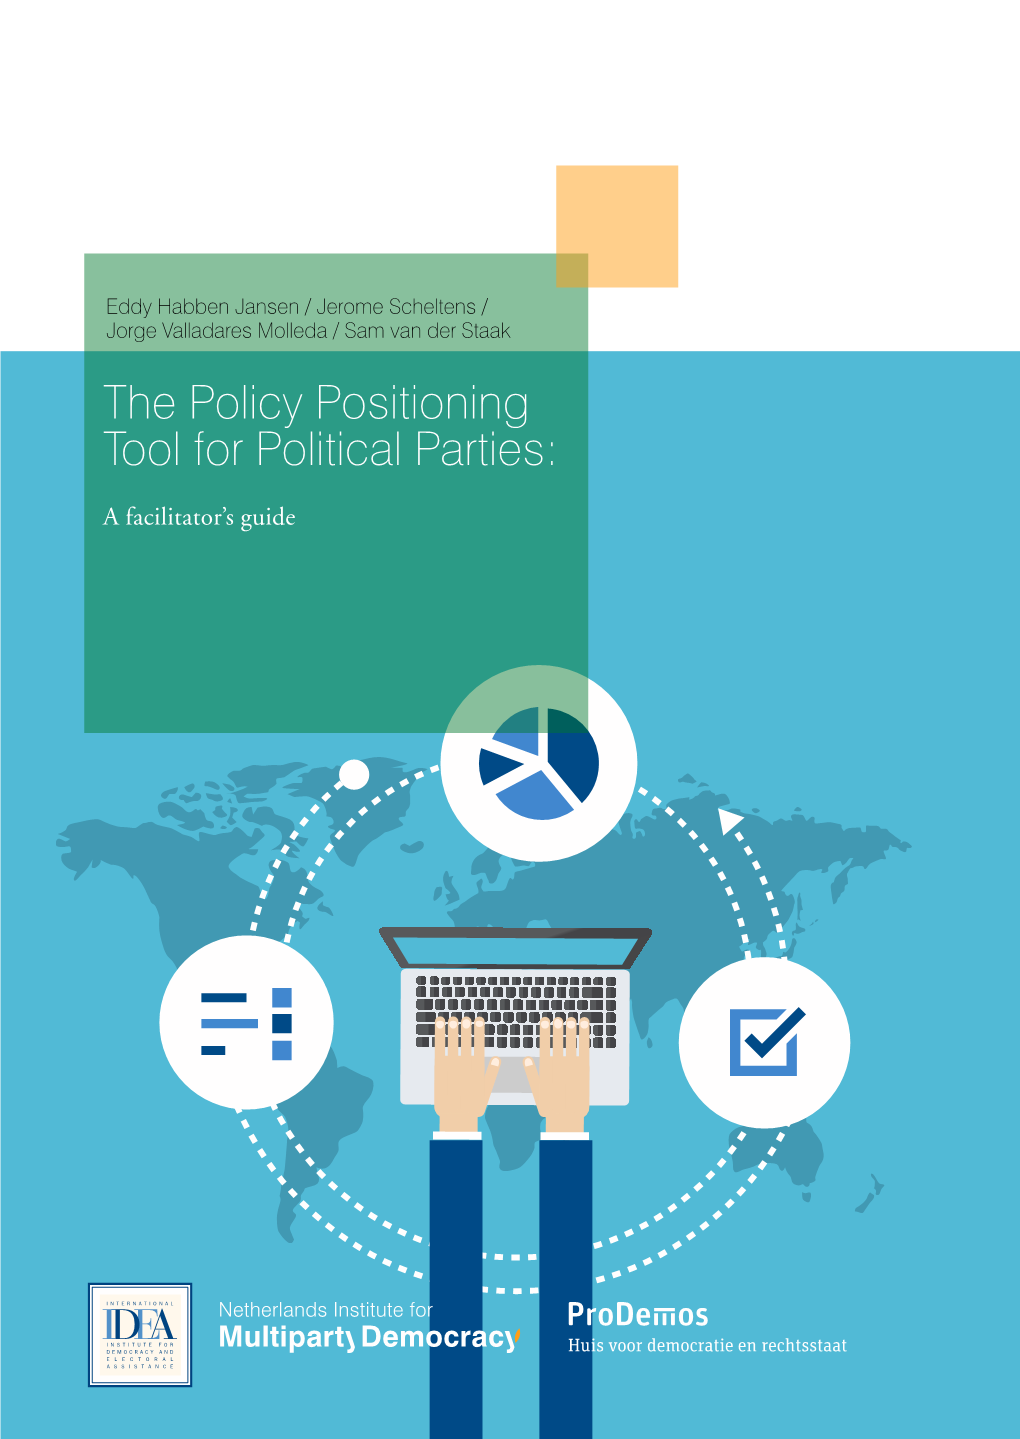 The Policy Positioning Tool for Political Parties: a Facilitator's Guide